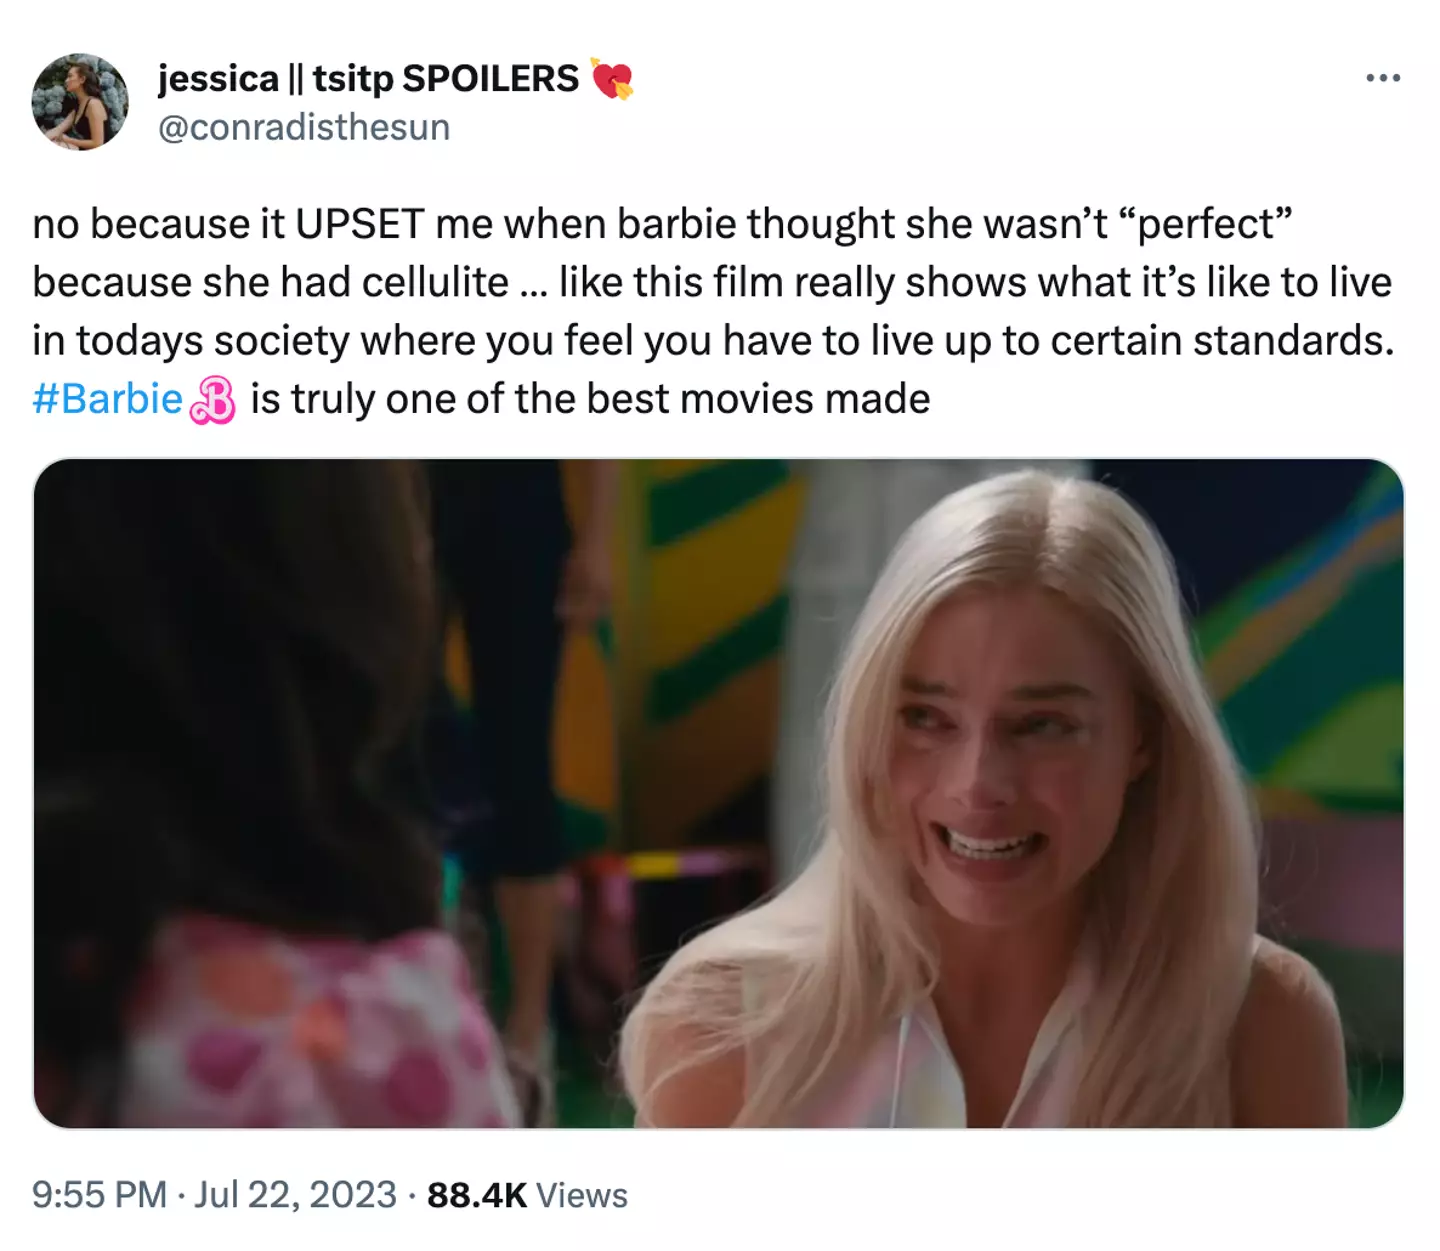 People are calling Barbie 'one of the best movies made'.